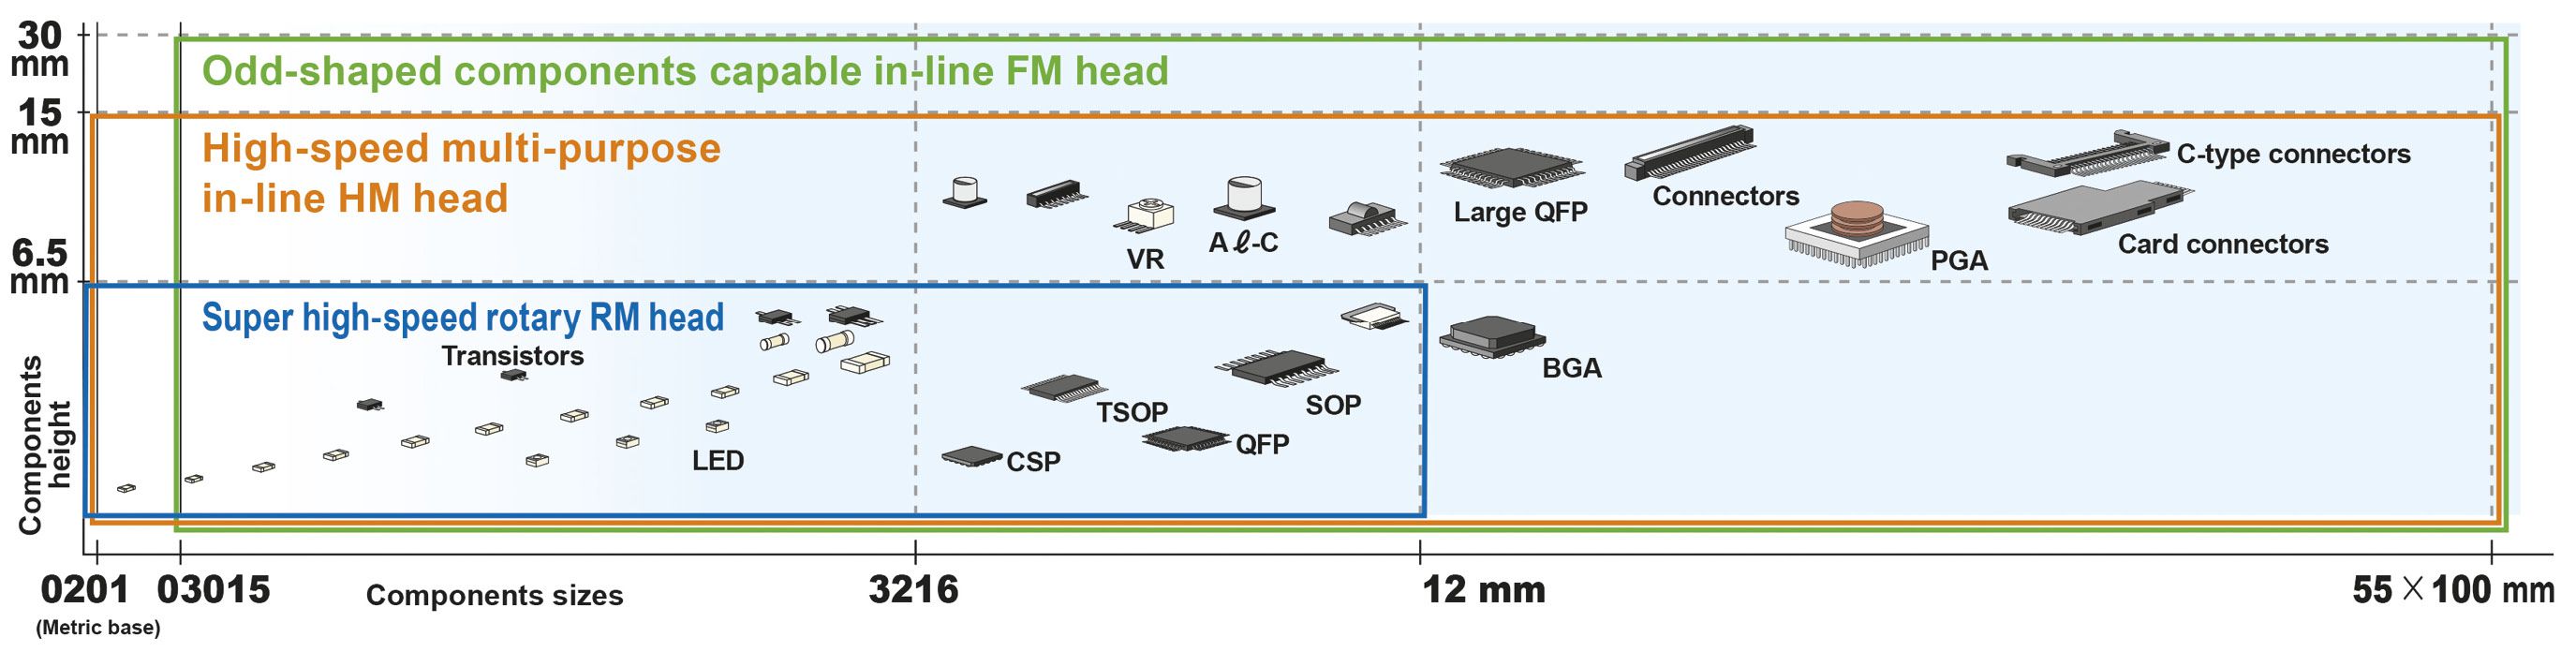 Illustation of how the RM head and others mounting heads covering the gamut of SMT component types